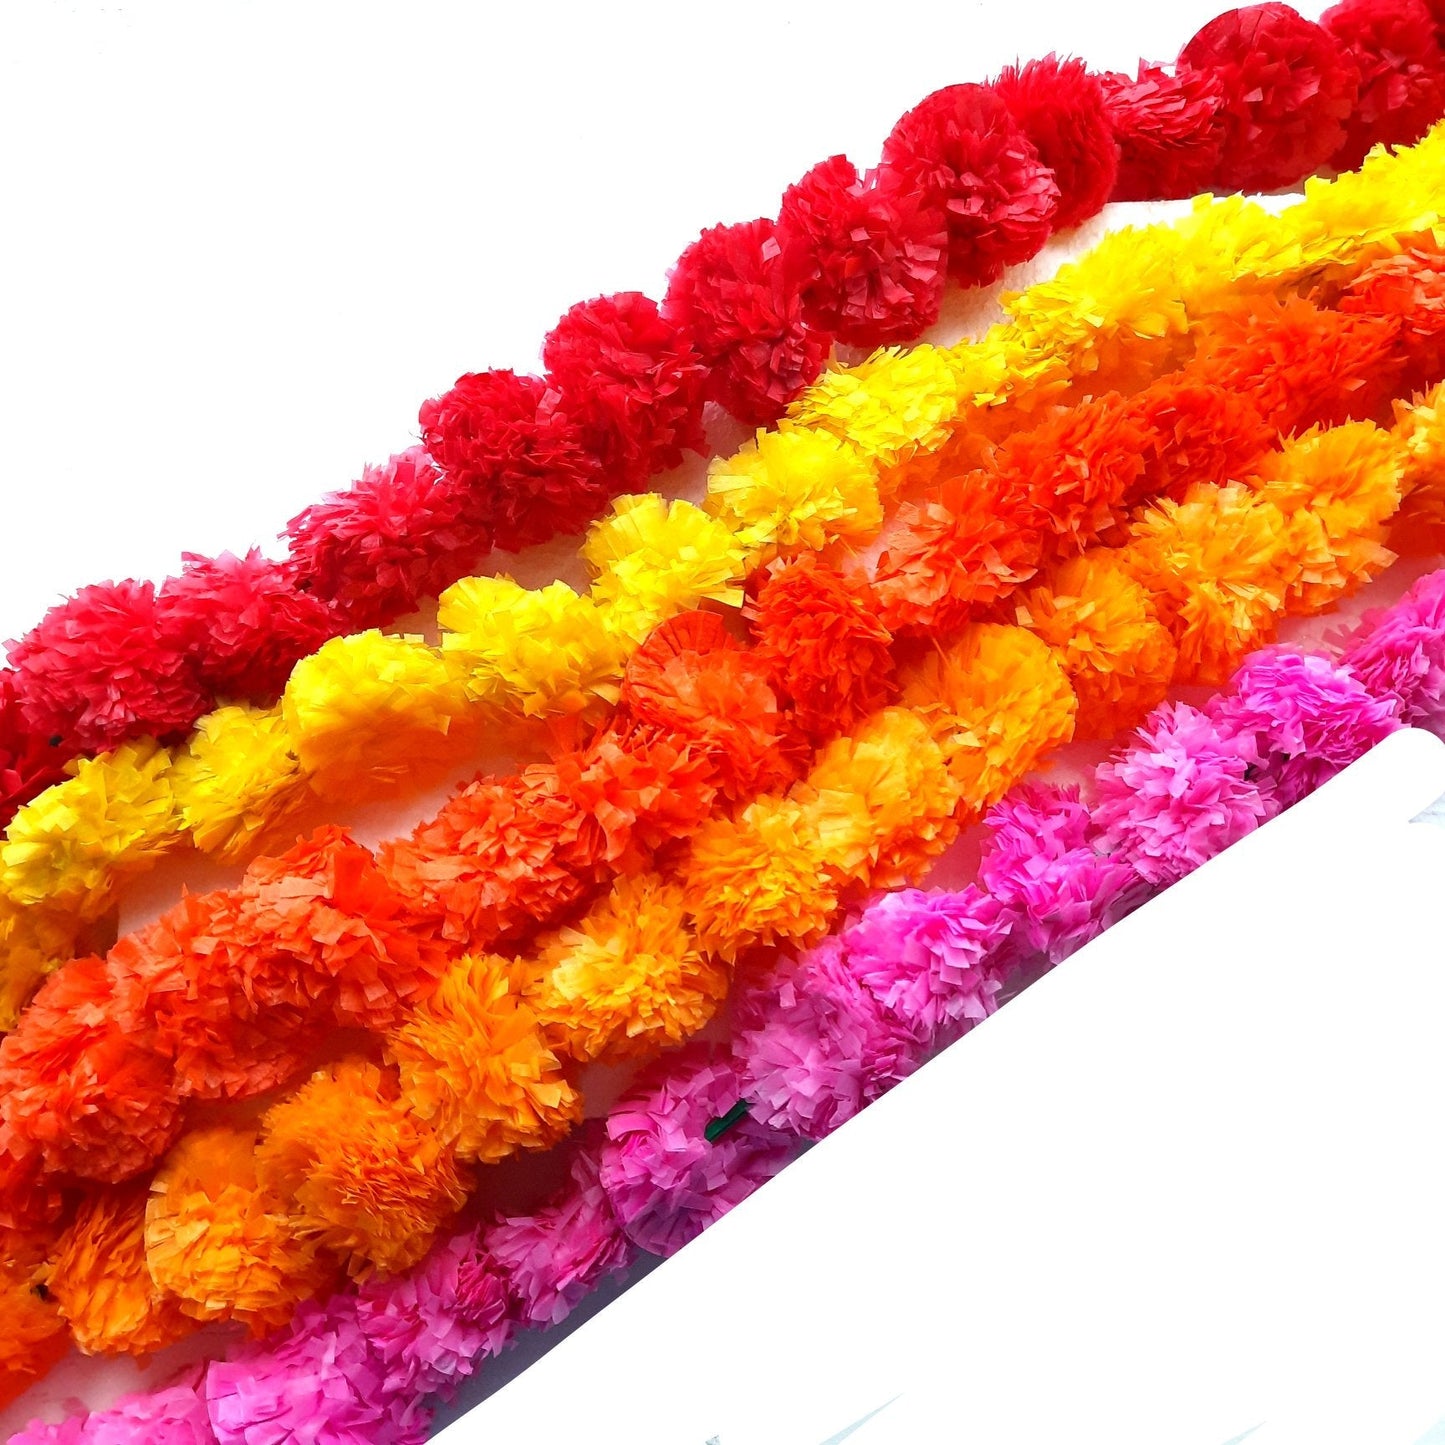 Artificial marigold flower string:  Pink yellow